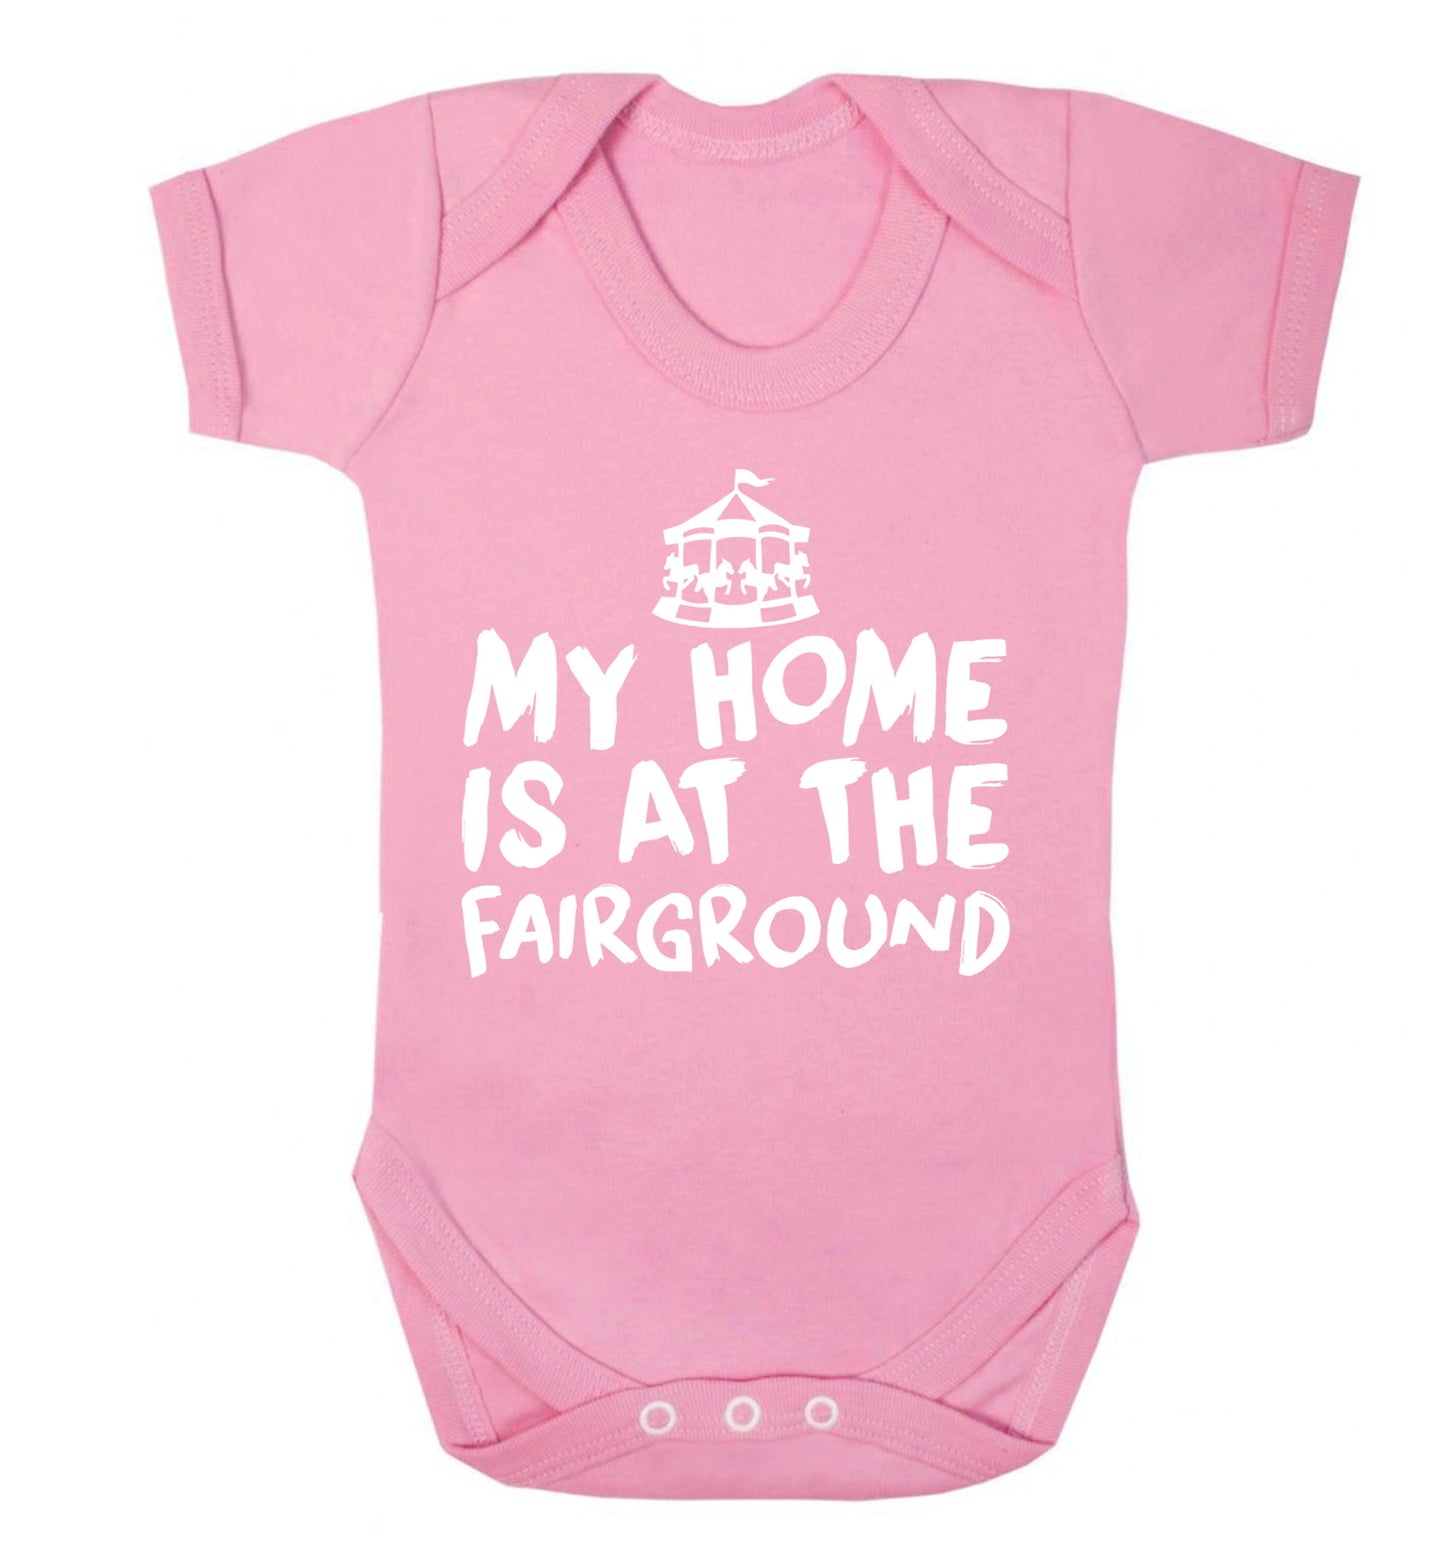 My home is at the fairground Baby Vest pale pink 18-24 months